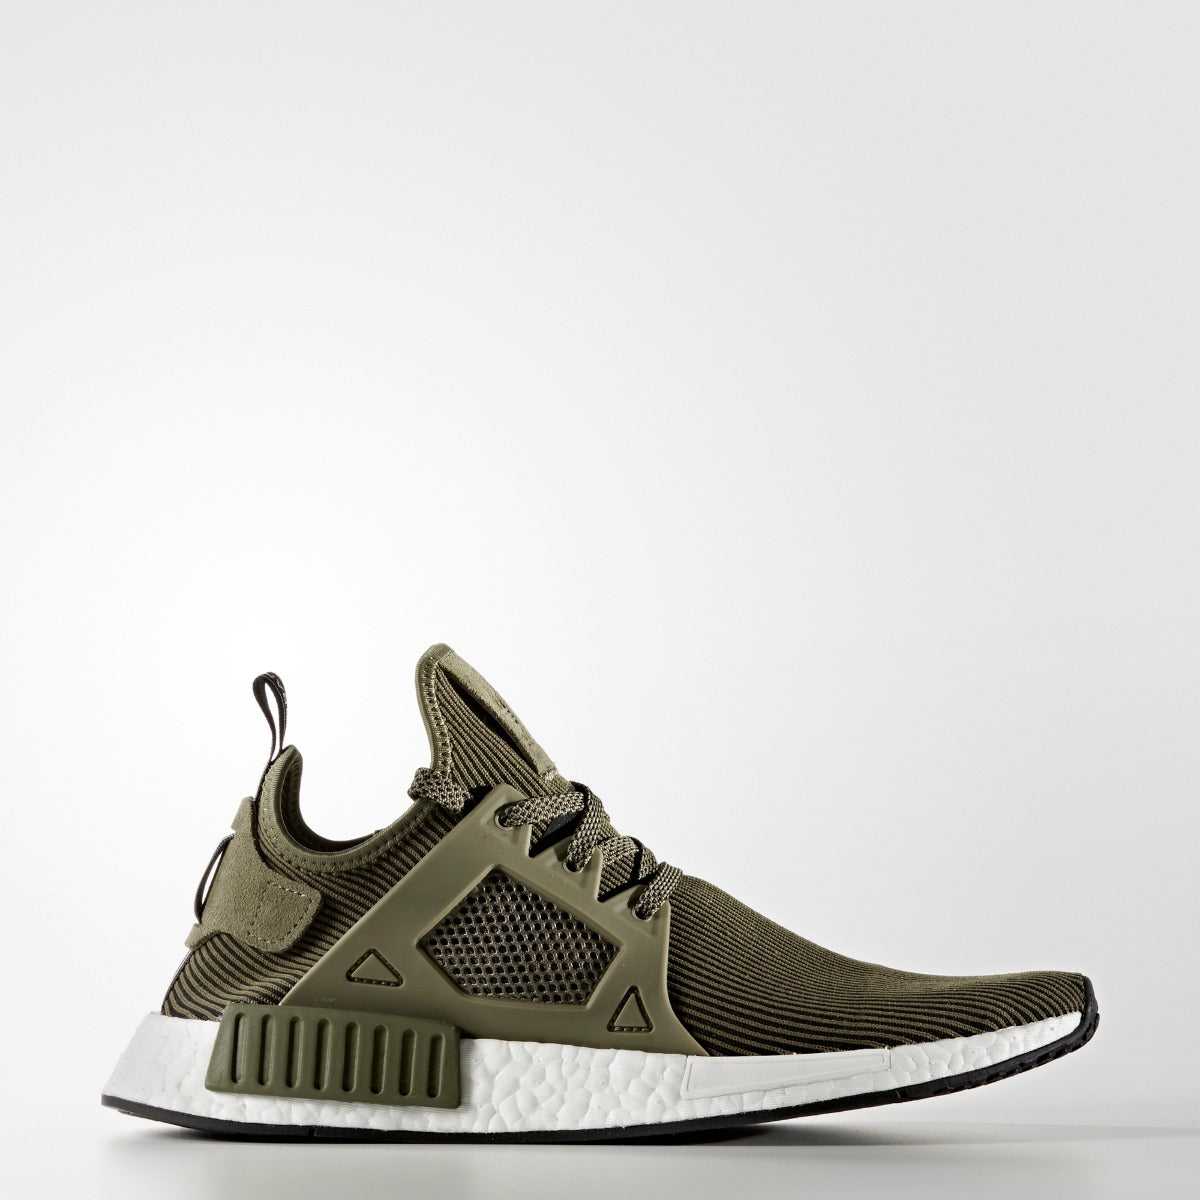 nmd_xr1 shoes